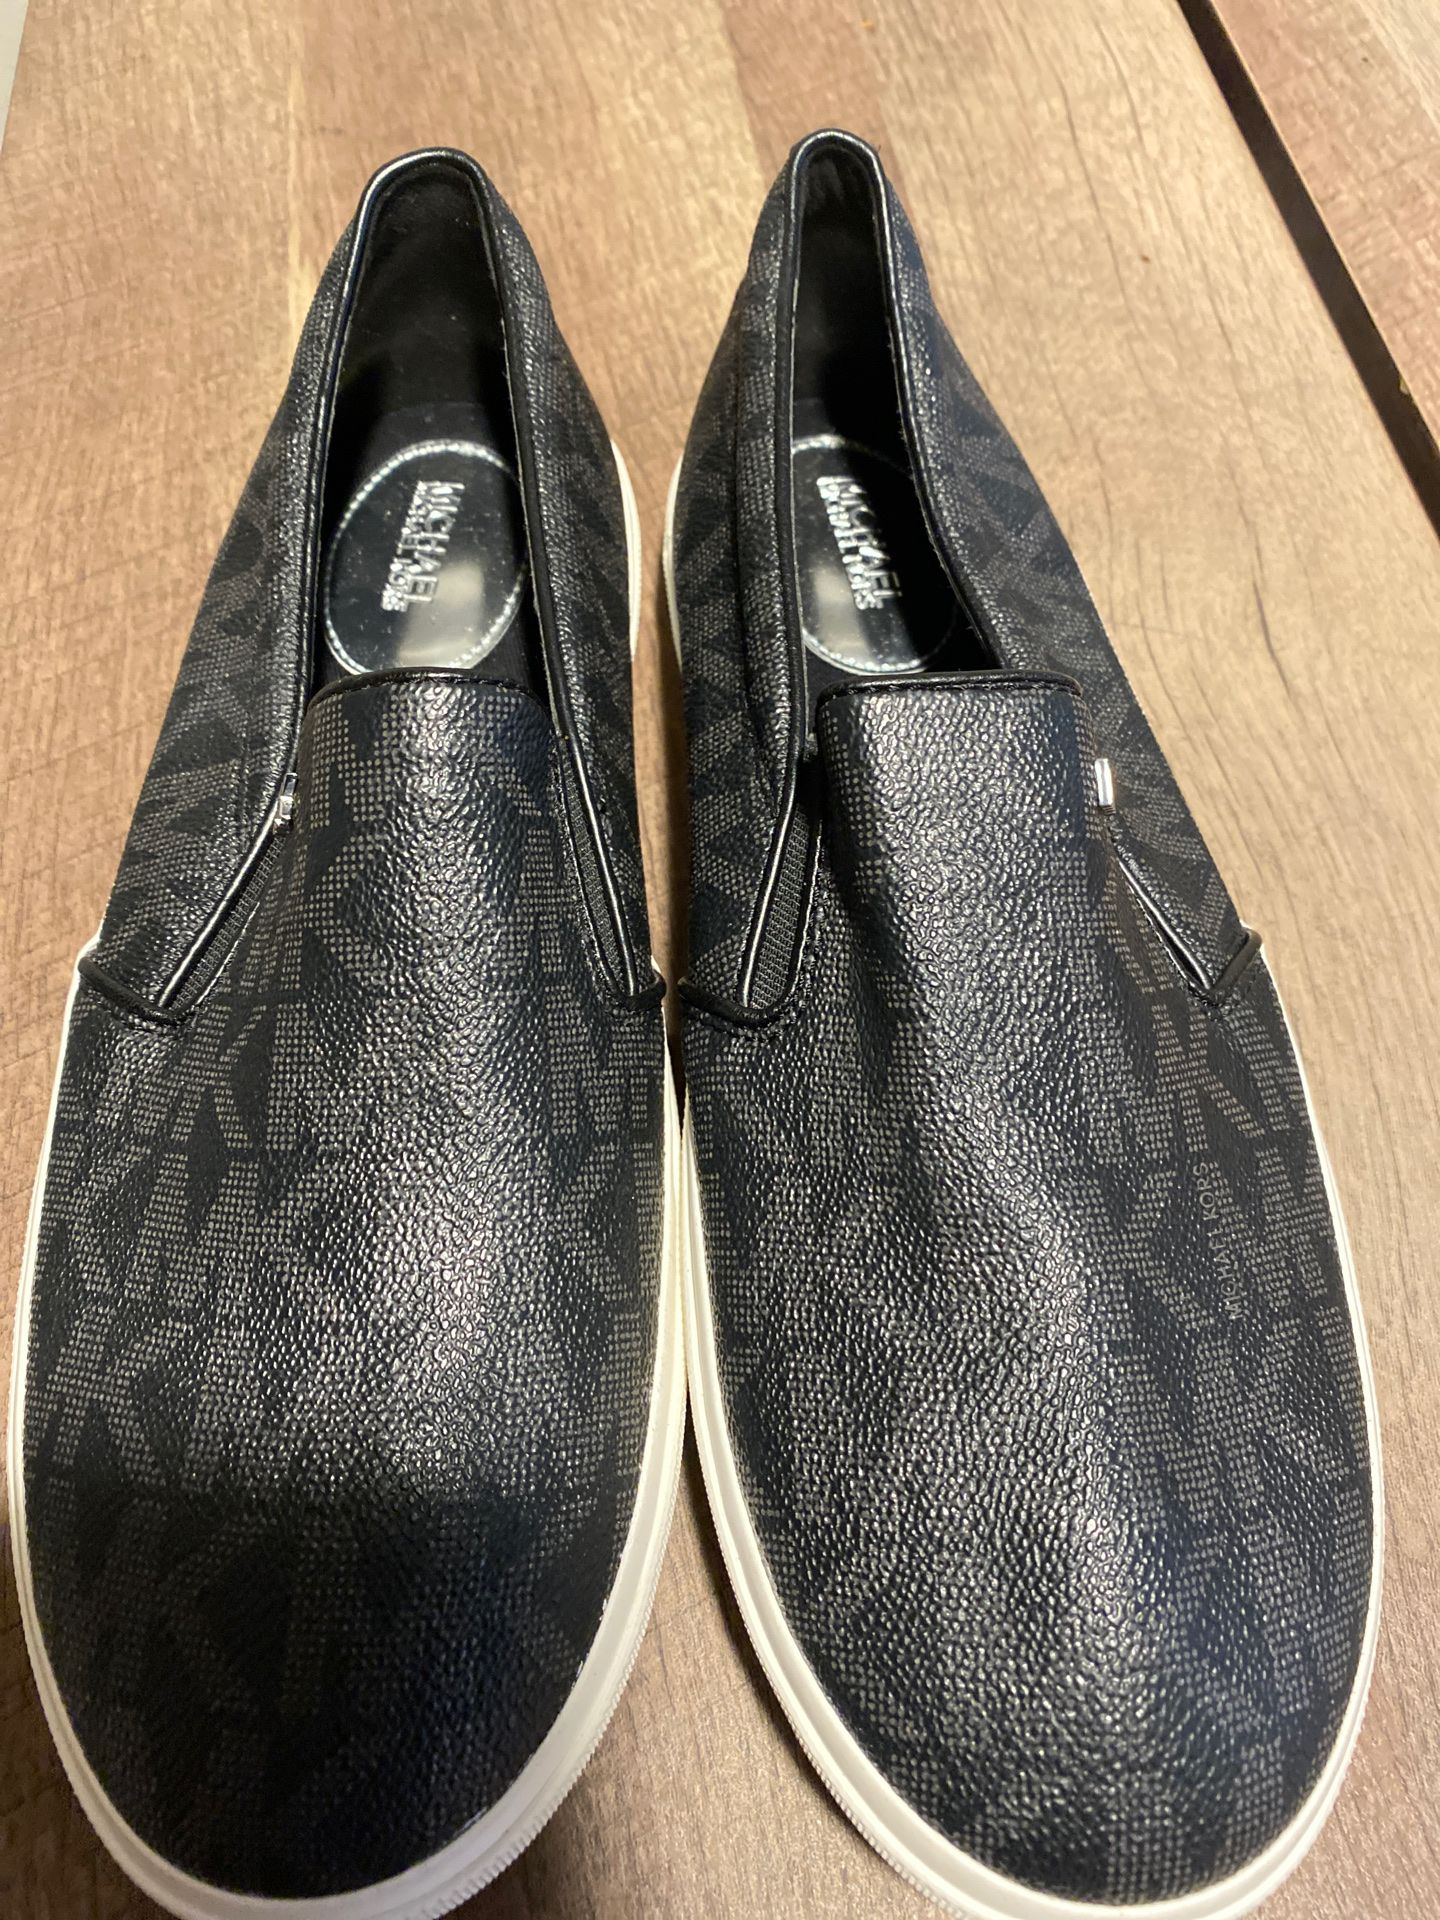 Brand New Michael Kors Shoes Size 9